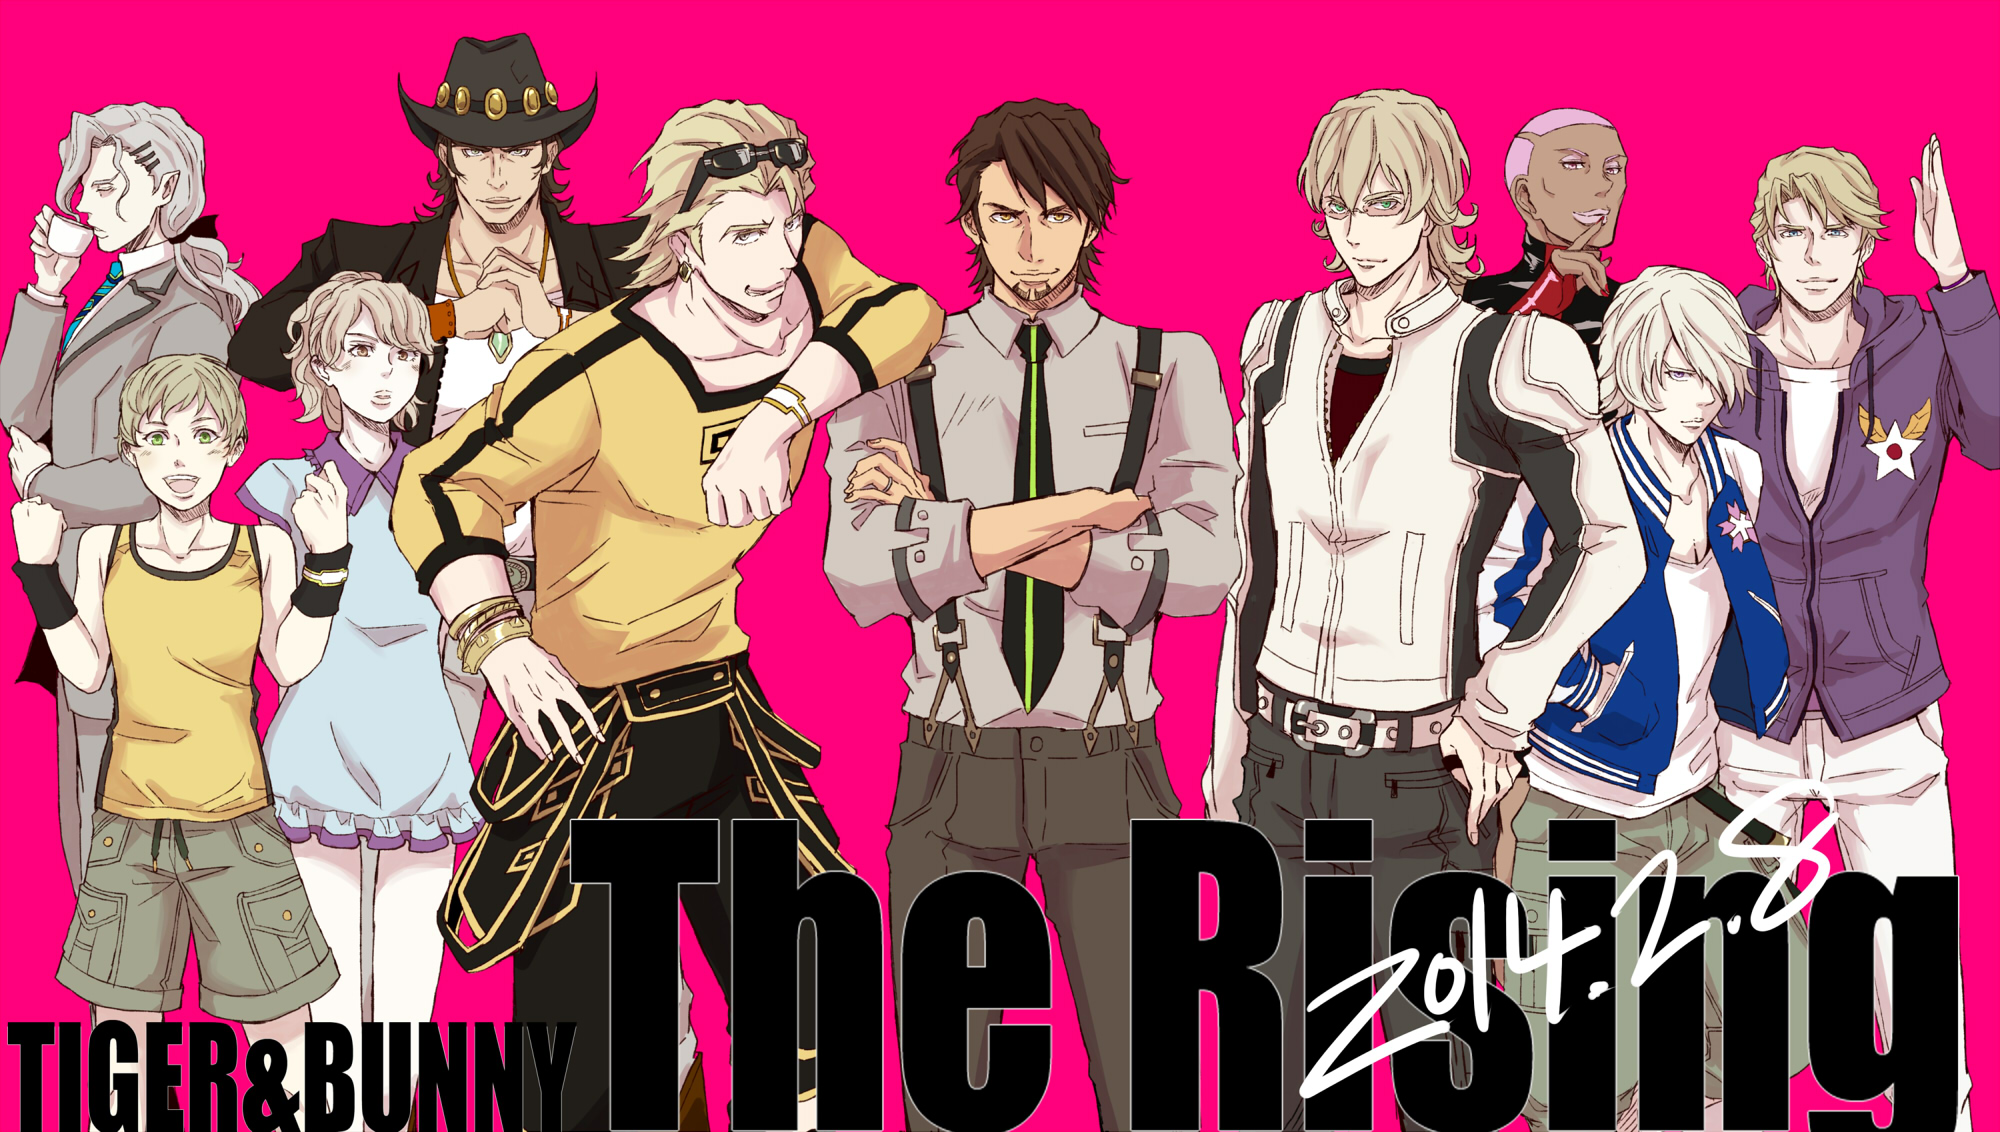 Anime Tiger & Bunny HD Wallpaper by しい菜